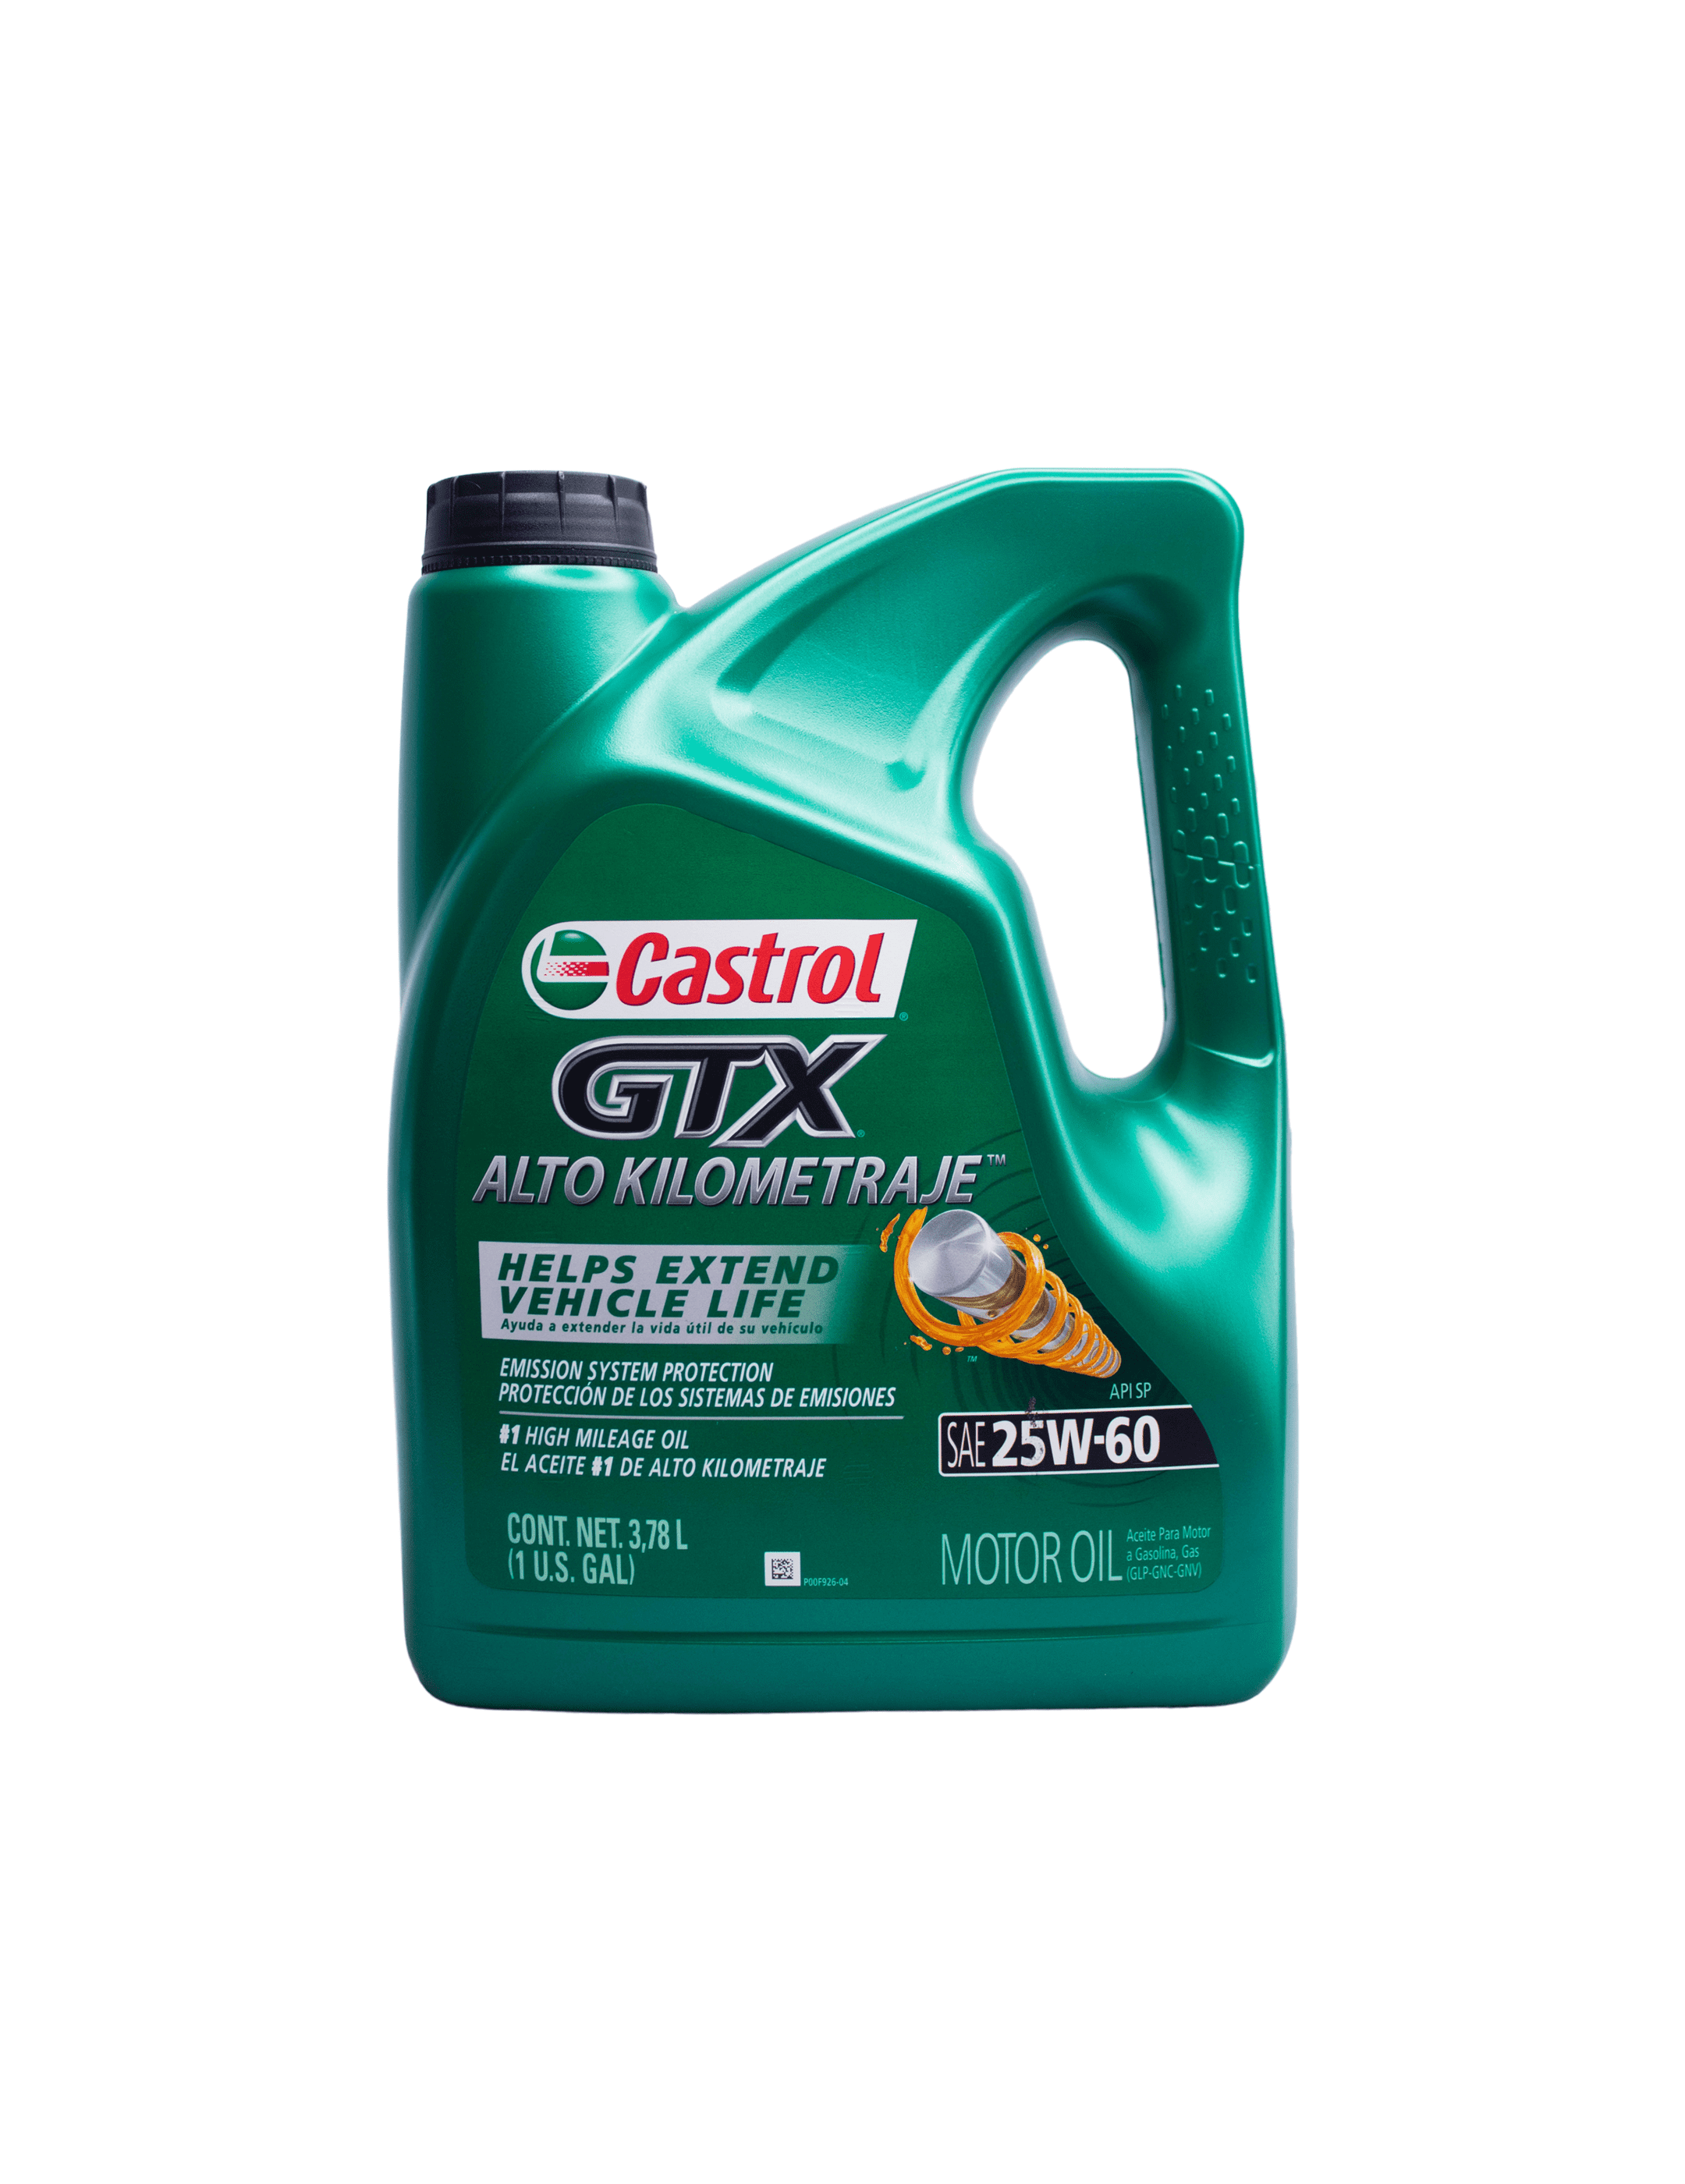 Lubricante para autos Shell Helix HX8 Pro Syn AG